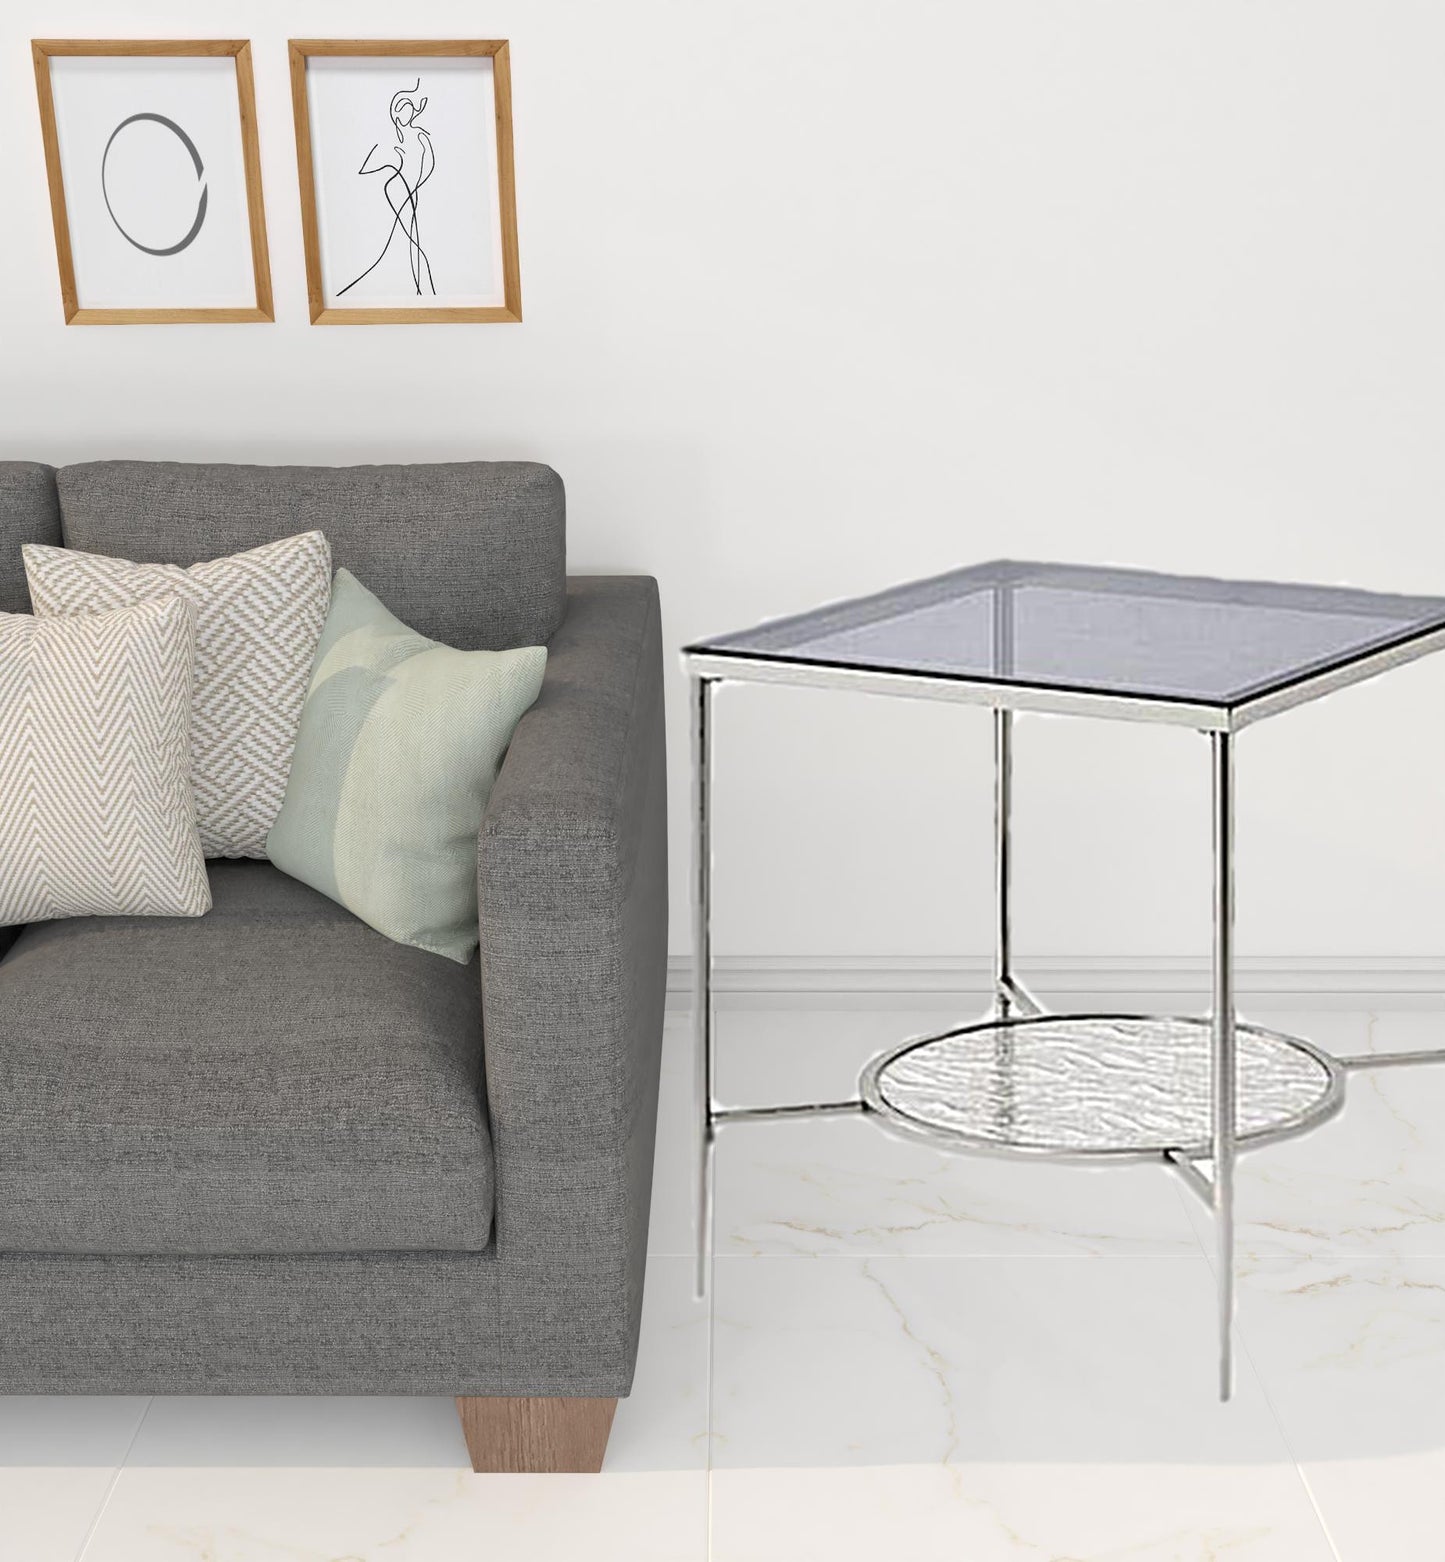 24" Chrome And Clear Glass And Metal Square End Table With Shelf By Homeroots